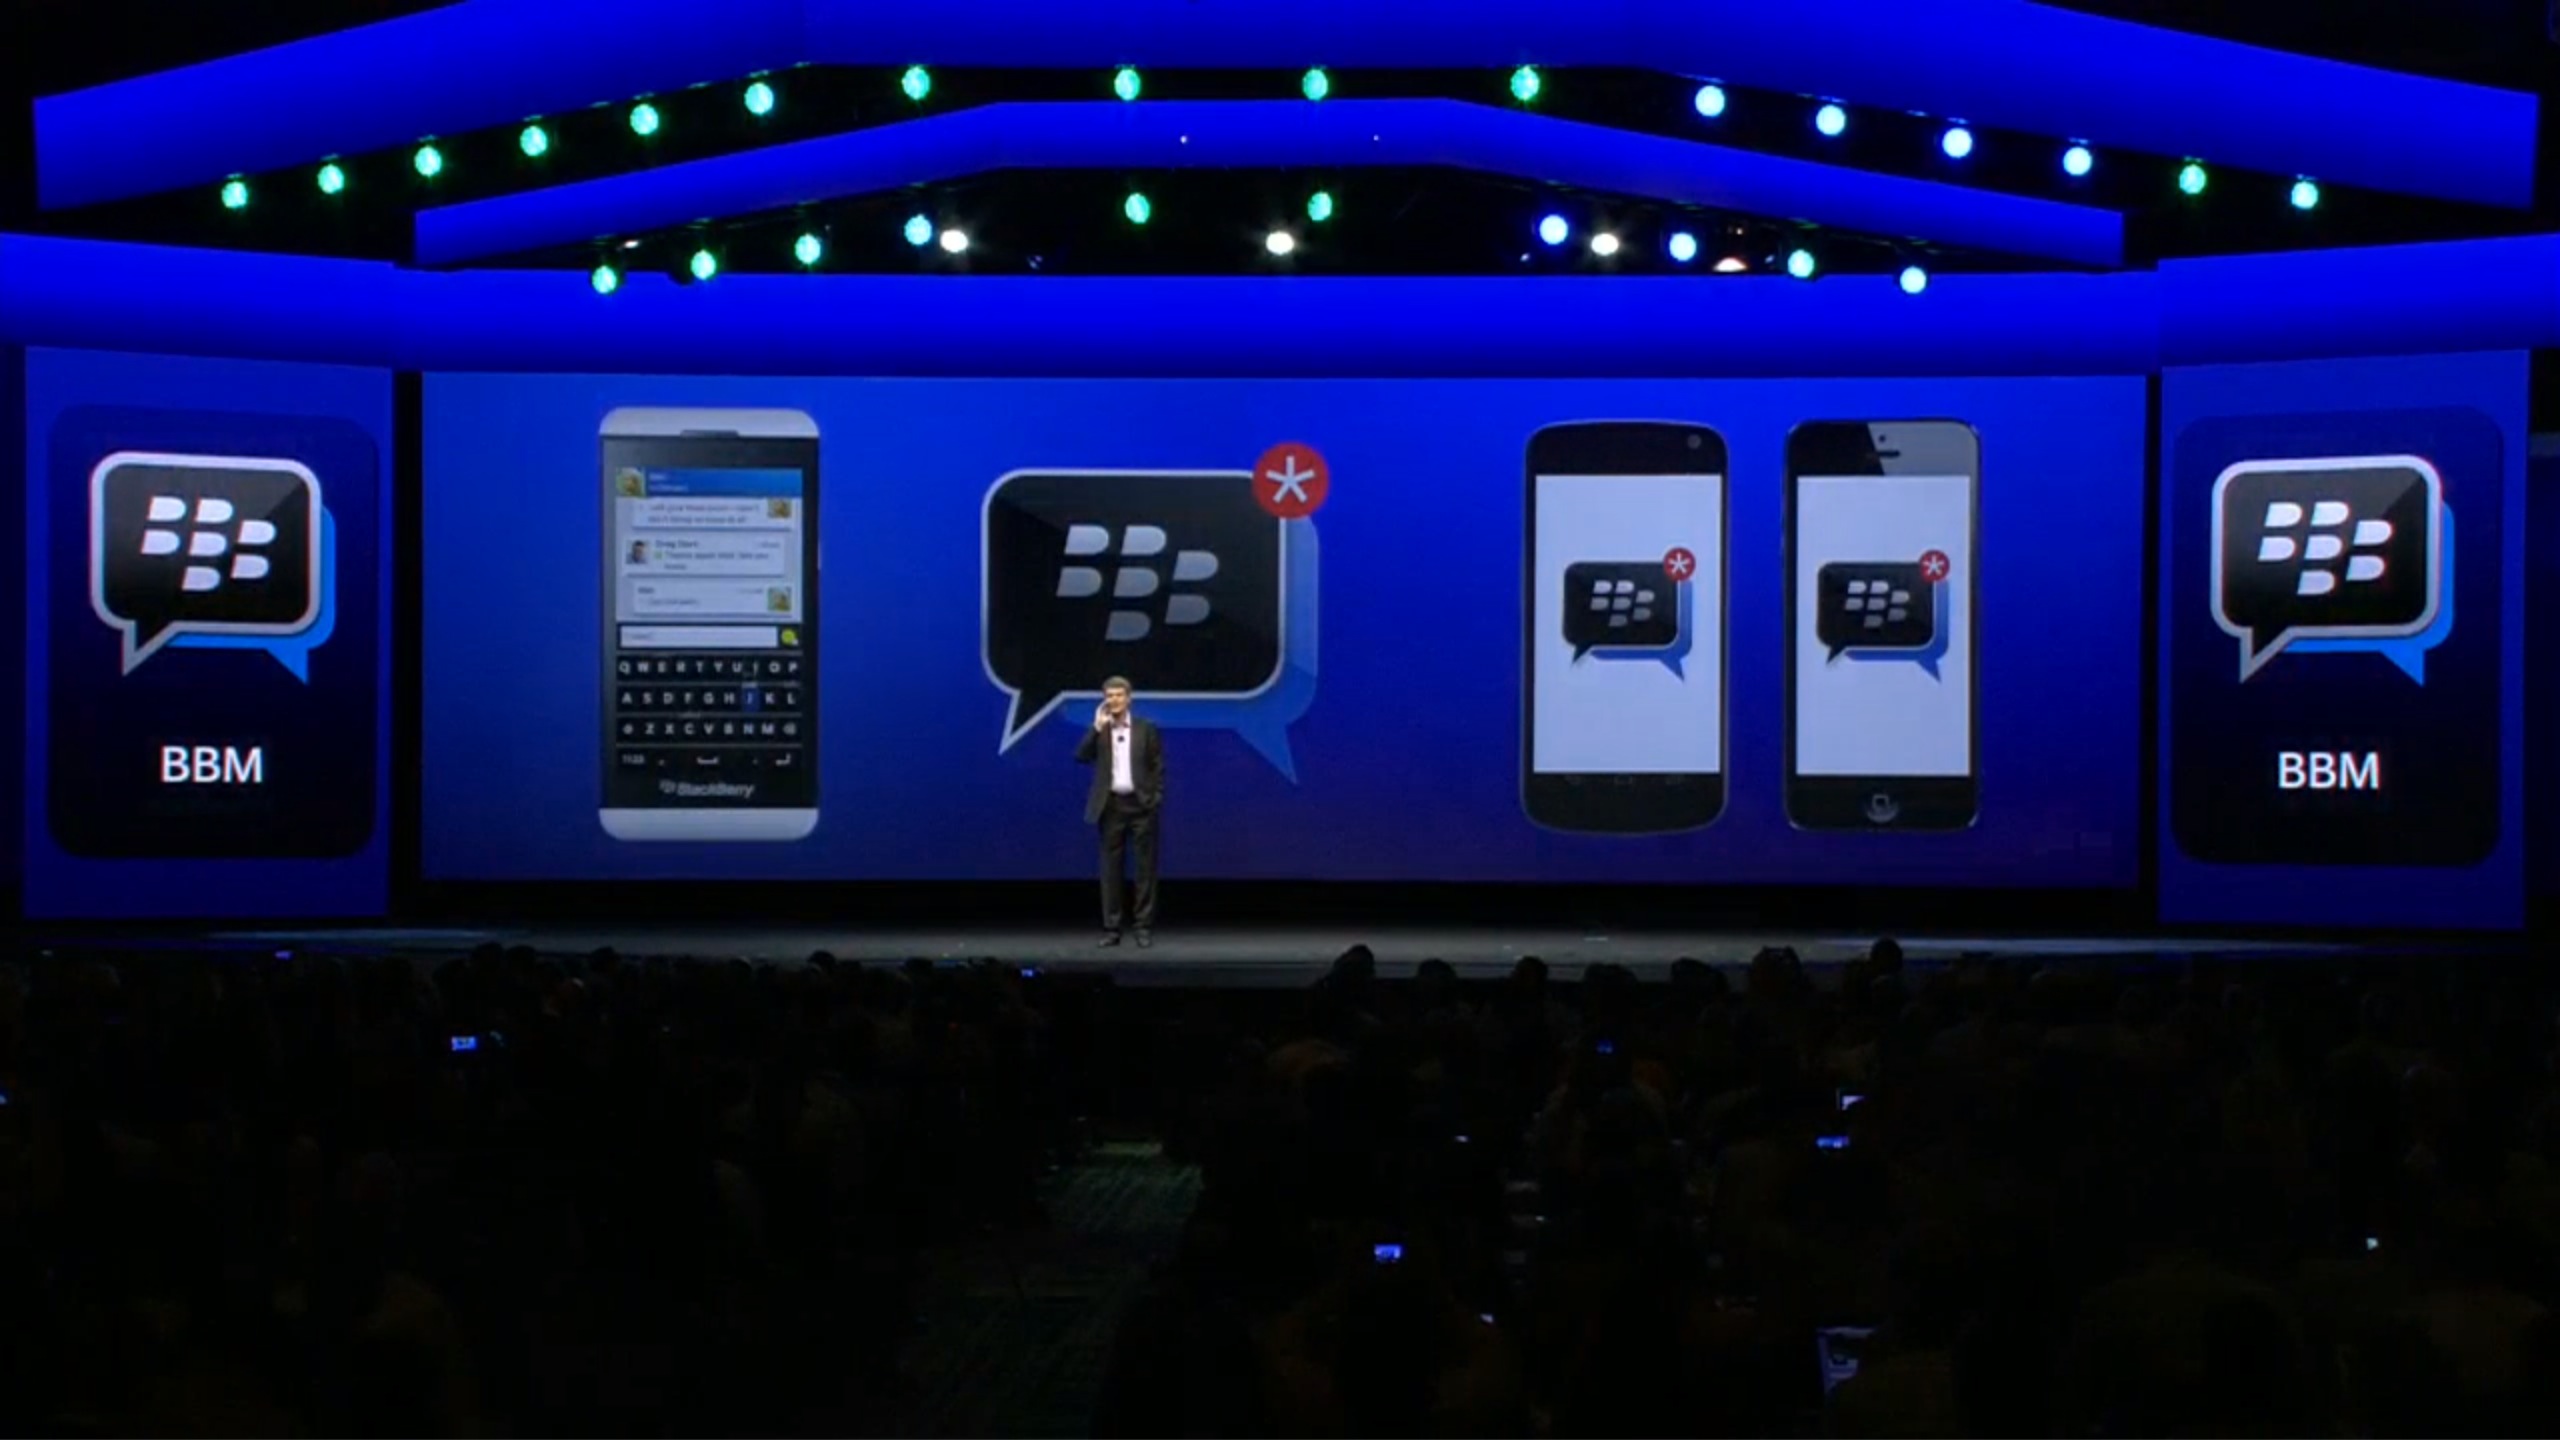 BlackBerry Messenger might be soon integrated in devices of rival companies